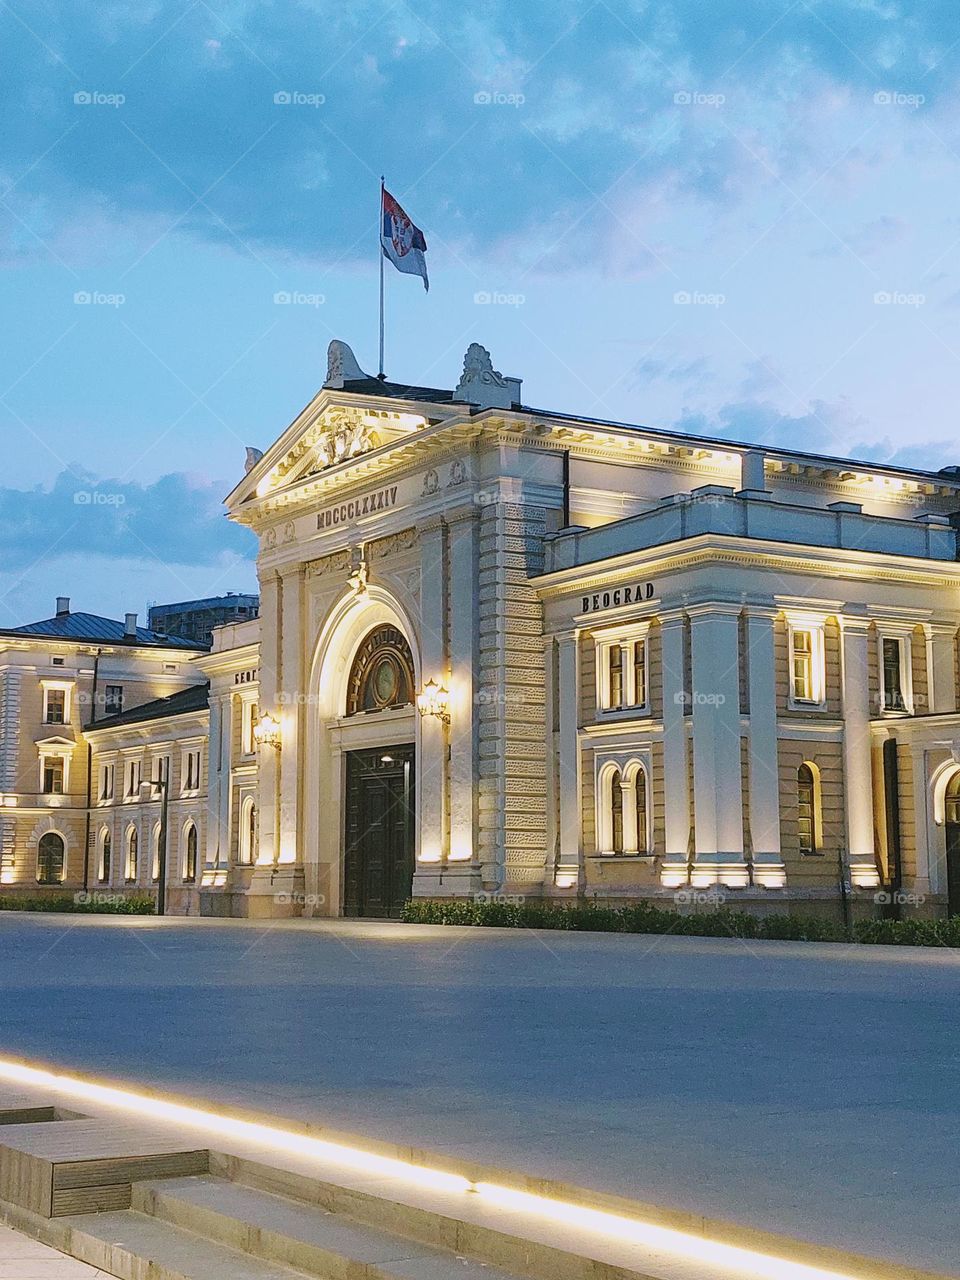 Former railway station in neoclassical style,  built in 1884. This wonderful building is located in Belgrade